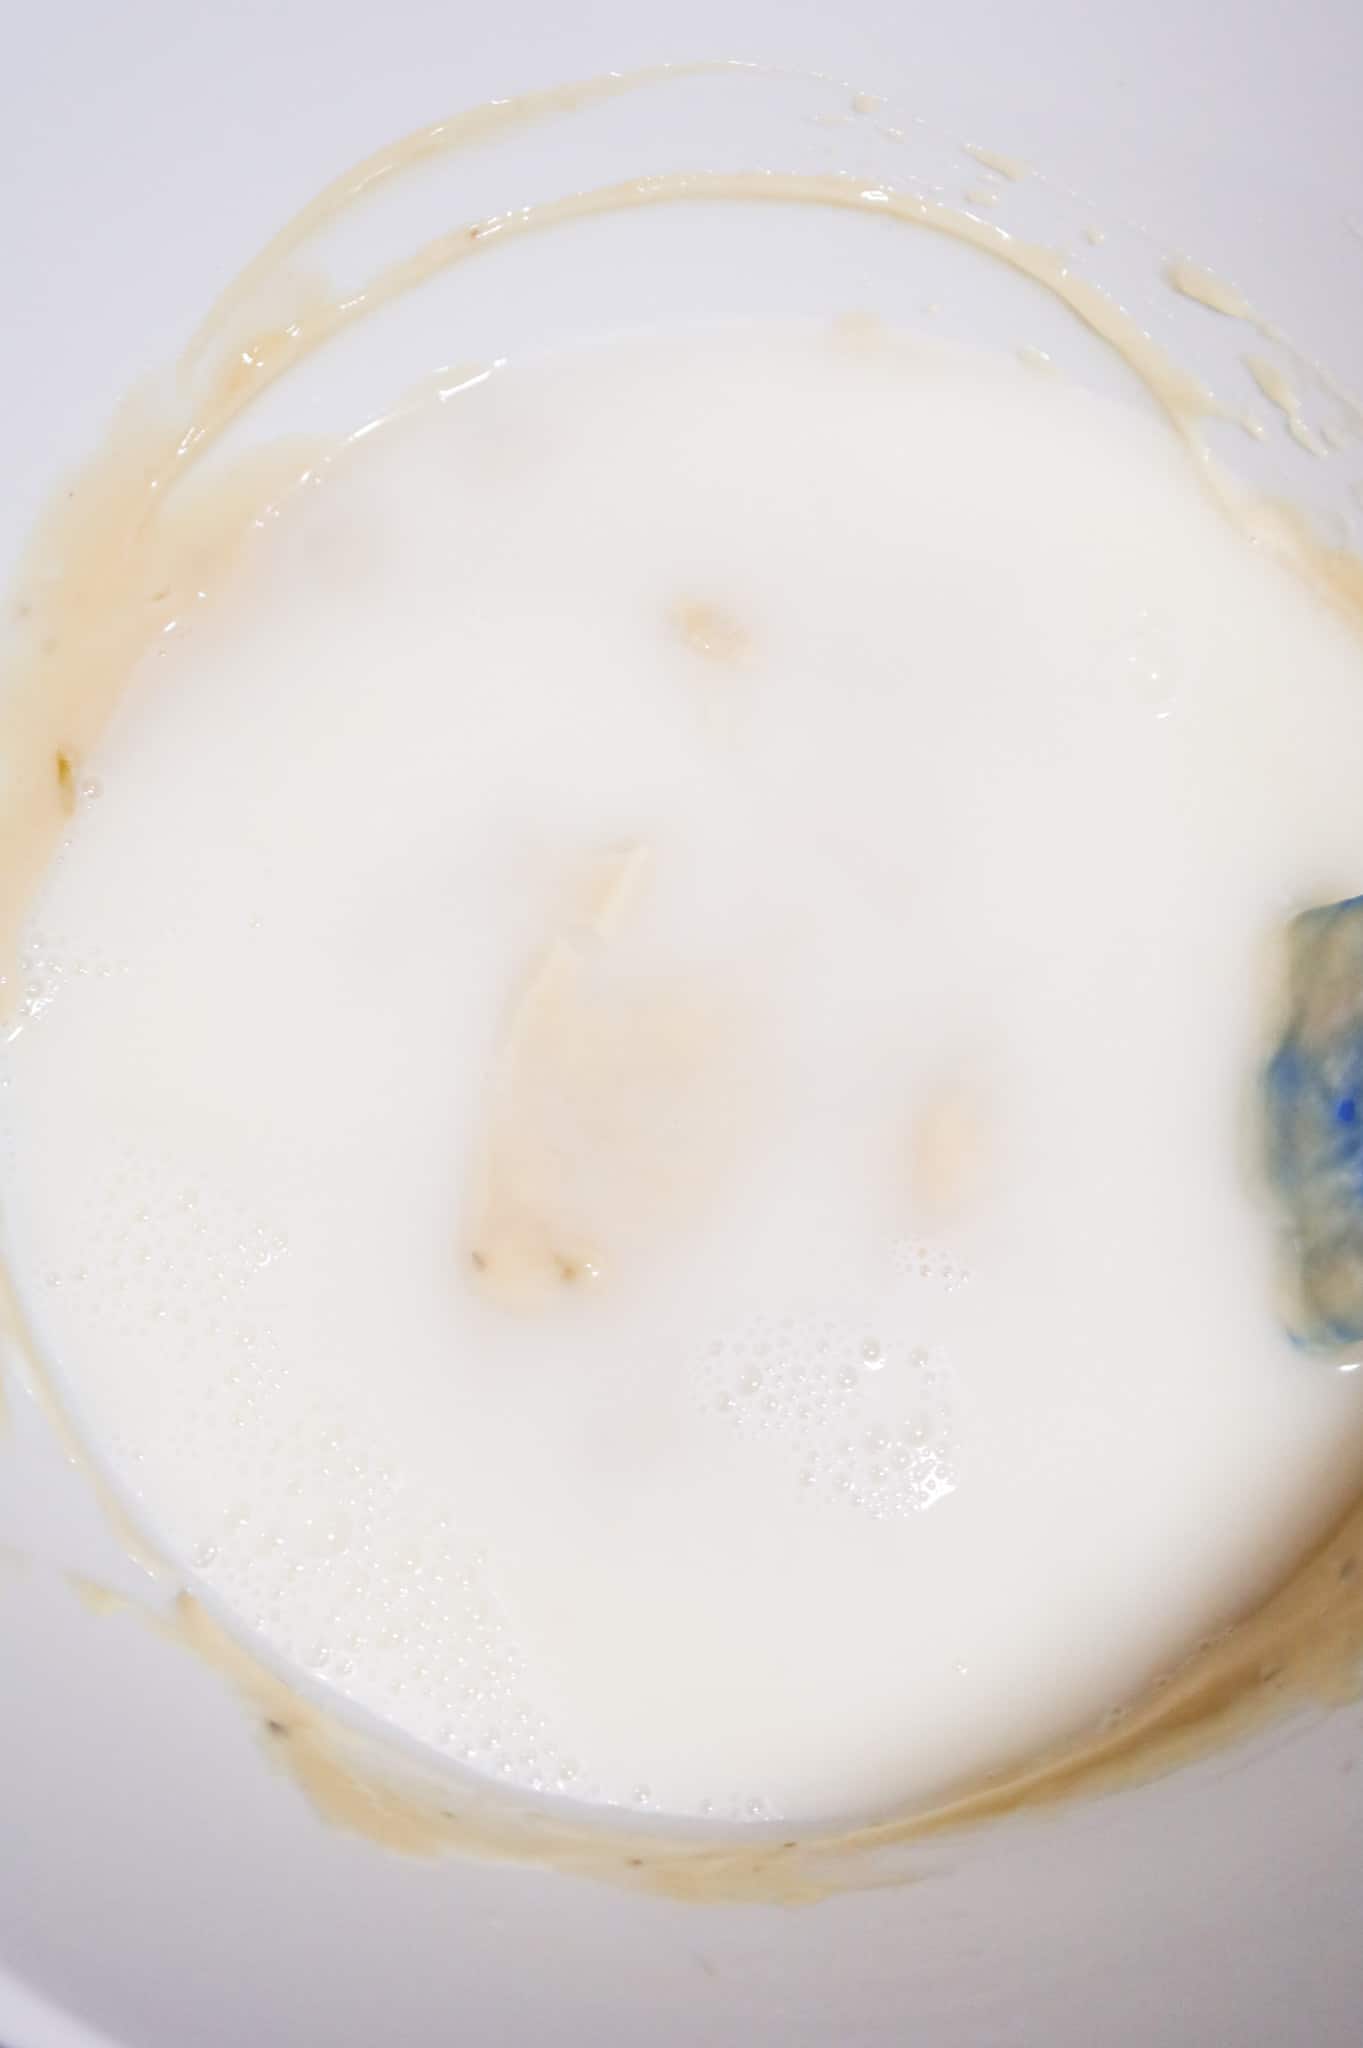 water and milk added to cream soup mixture in a mixing bowl